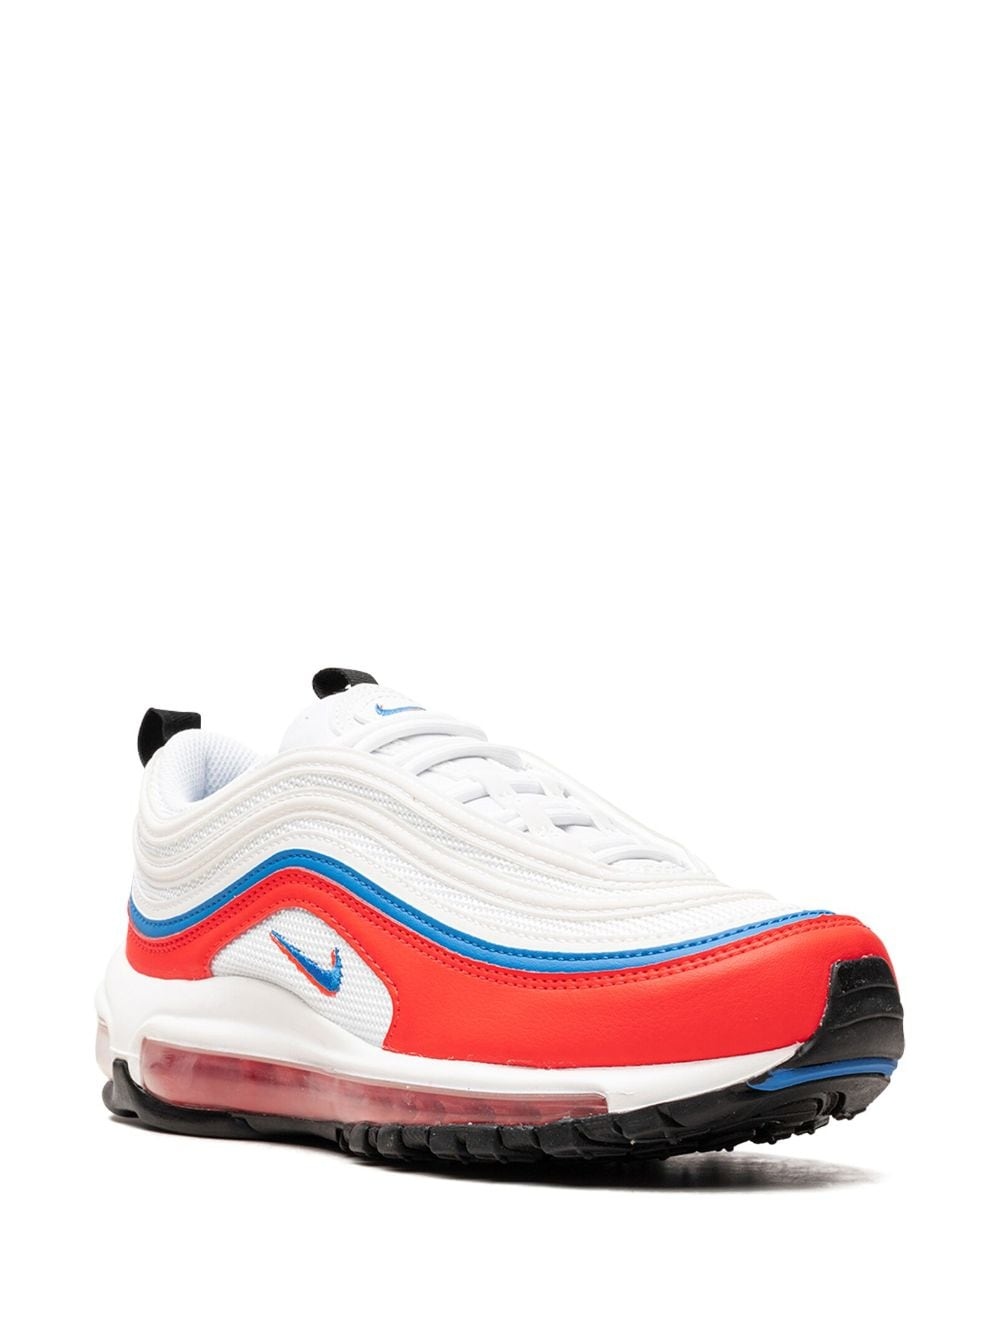 Air Max 97 "Double Swoosh" sneakers - 2